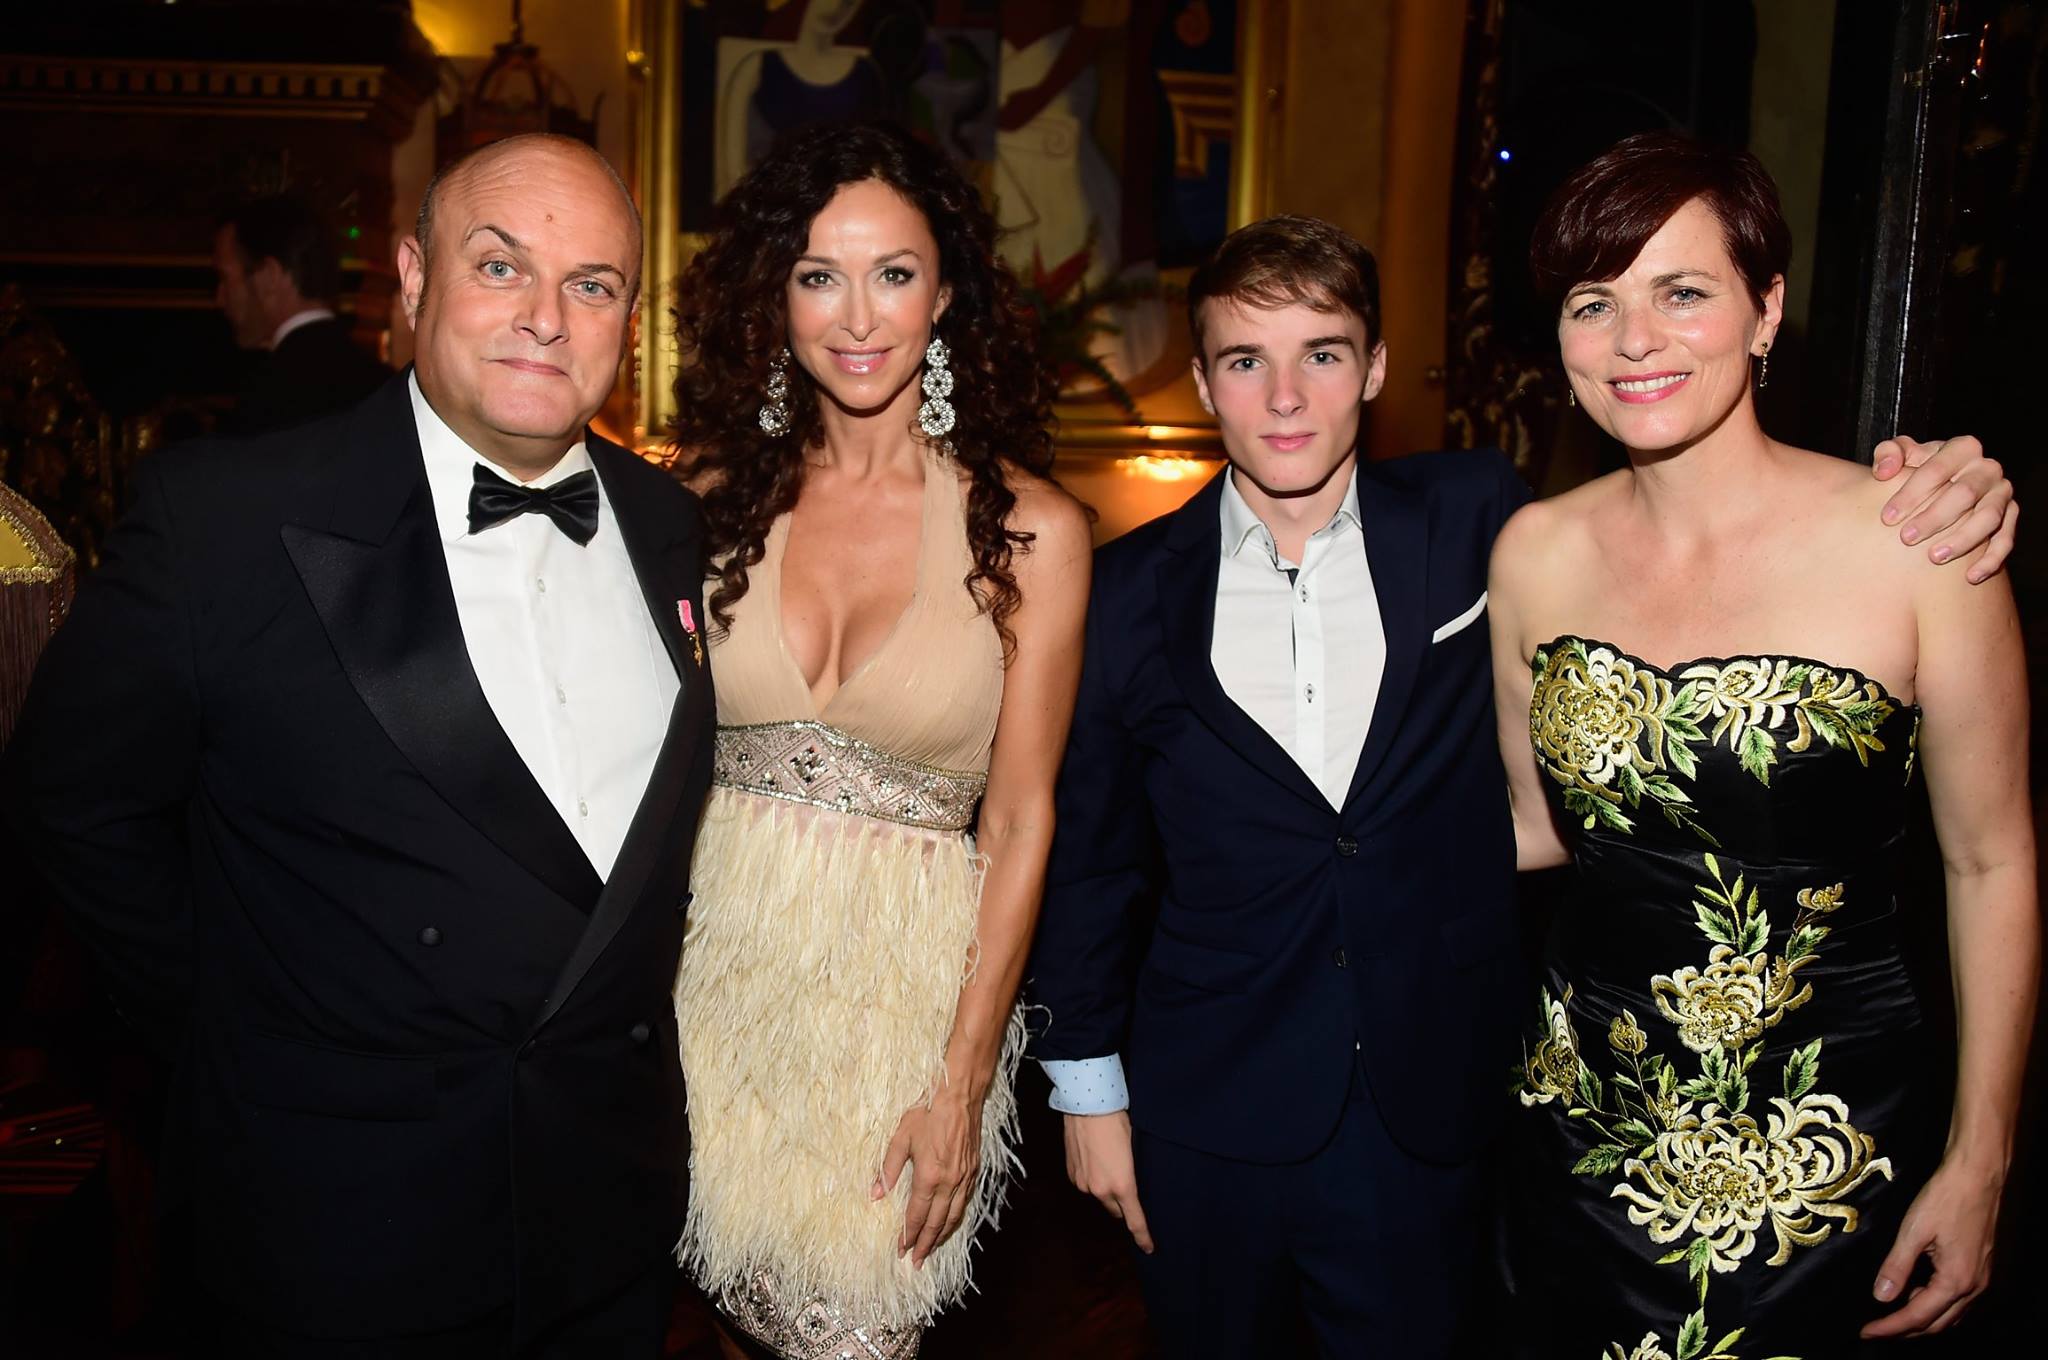 Former BAFTA Chairman of the Board, Nigel Daly, OBE, actress Sofia Milos (wearing SUE WONG), Max Daly and wife of Nigel Daly, filmmaker Louise Salter (wearing SUE WONG)